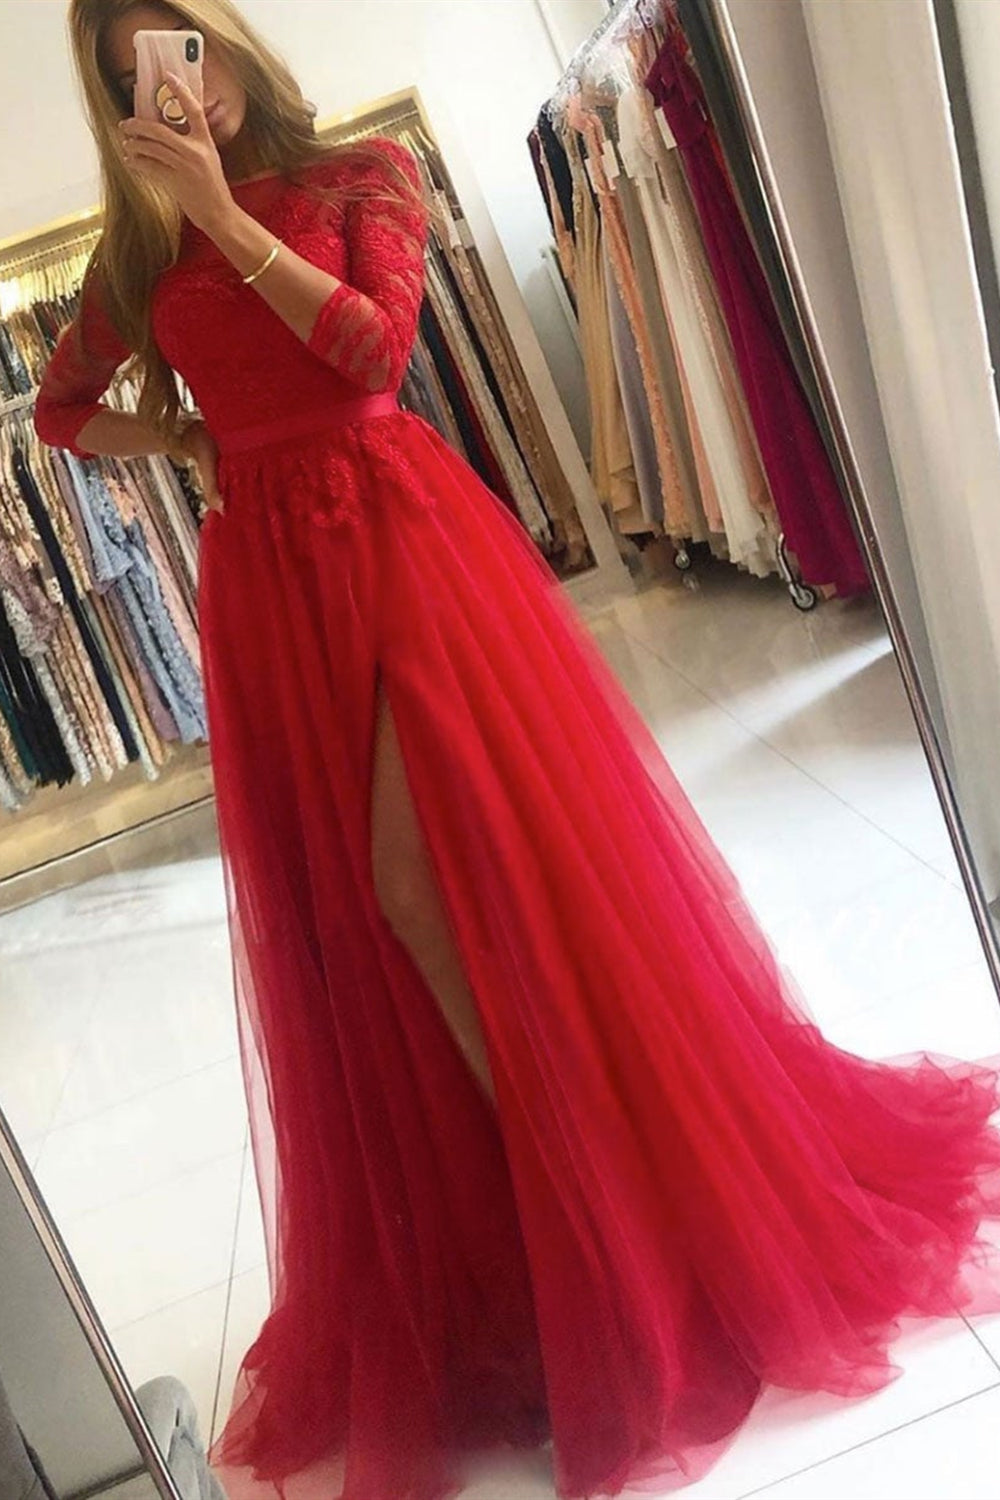 Half Sleeves Open Back Red Lace Long Prom Dresses with High Slit, Red Lace Formal Dresses, Red Evening Dresses